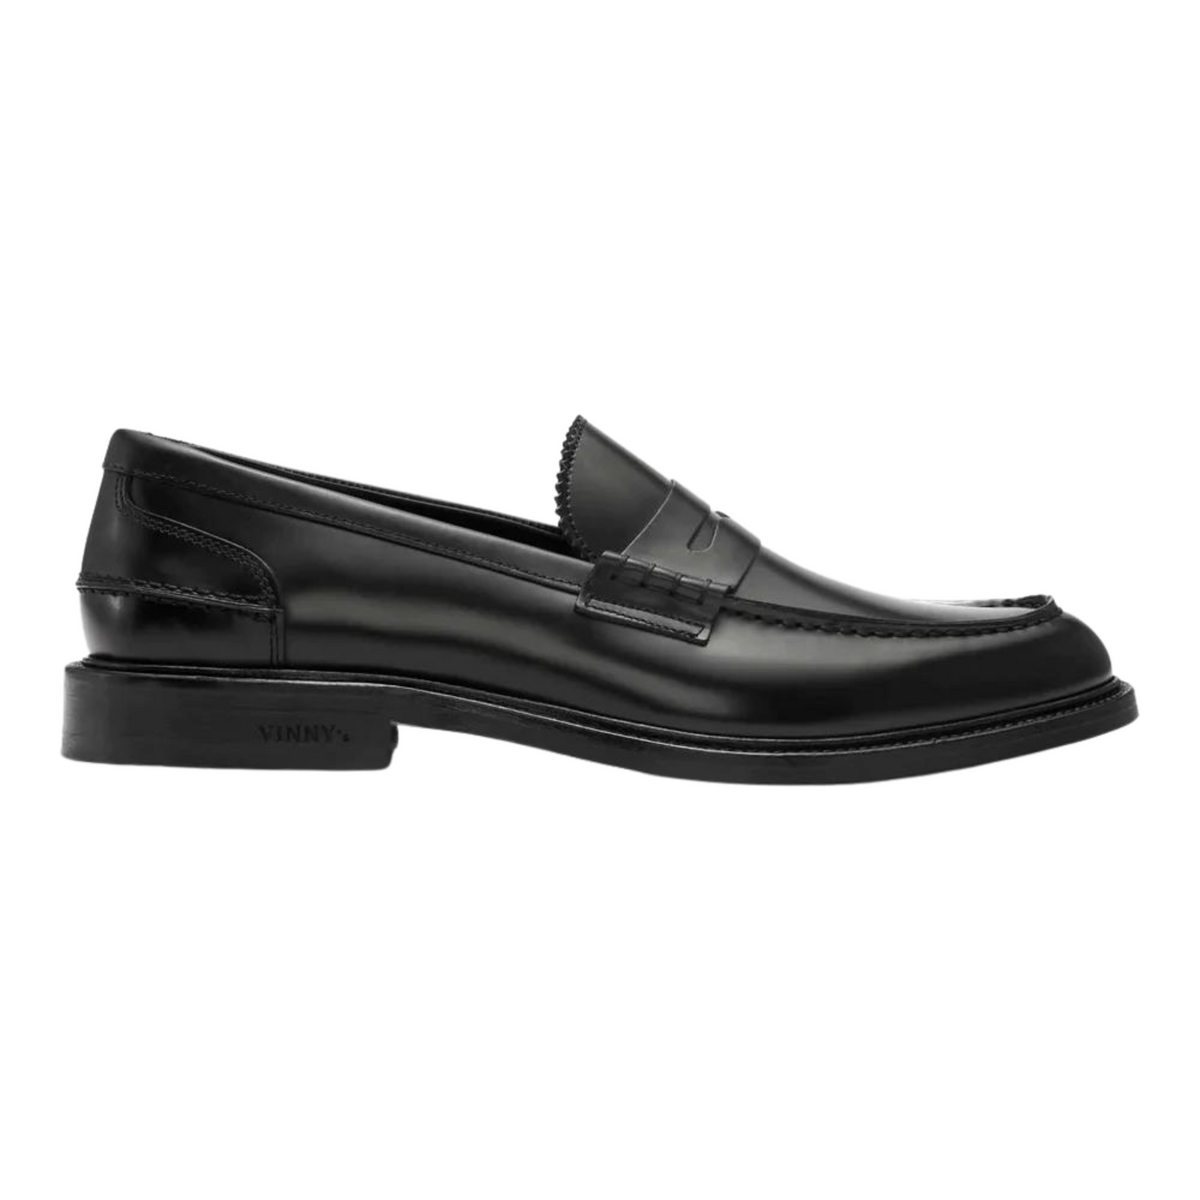 TOWNEE PENNY LOAFER